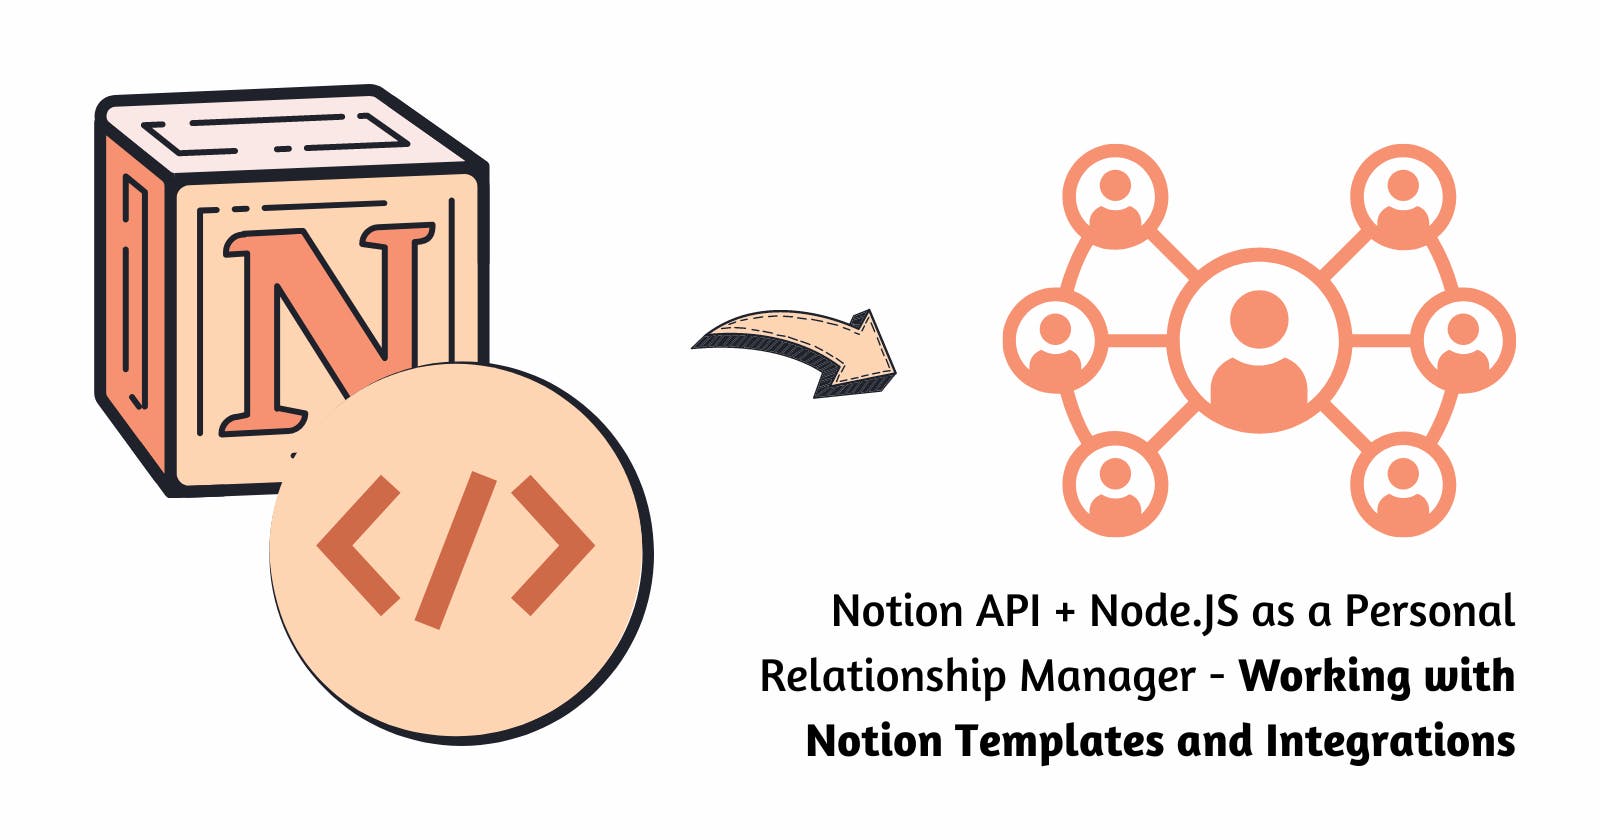 Building a (Personal) Relationship Manager with Notion API - Working with Notion Templates and Integrations